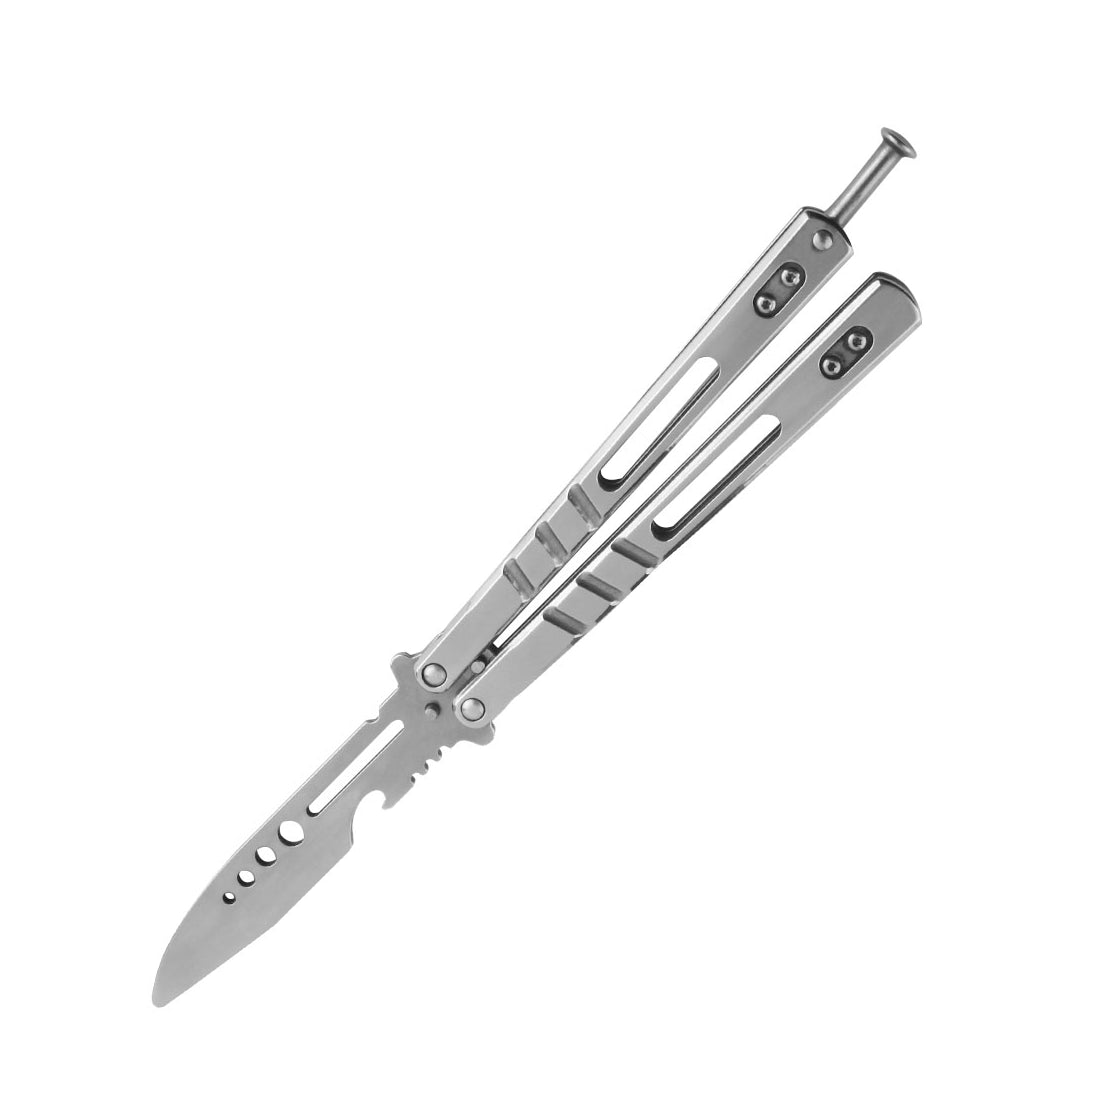 Andux Balisong Flipping Practice Tool Foldable CS/HDD41(Only Available in European Countries)